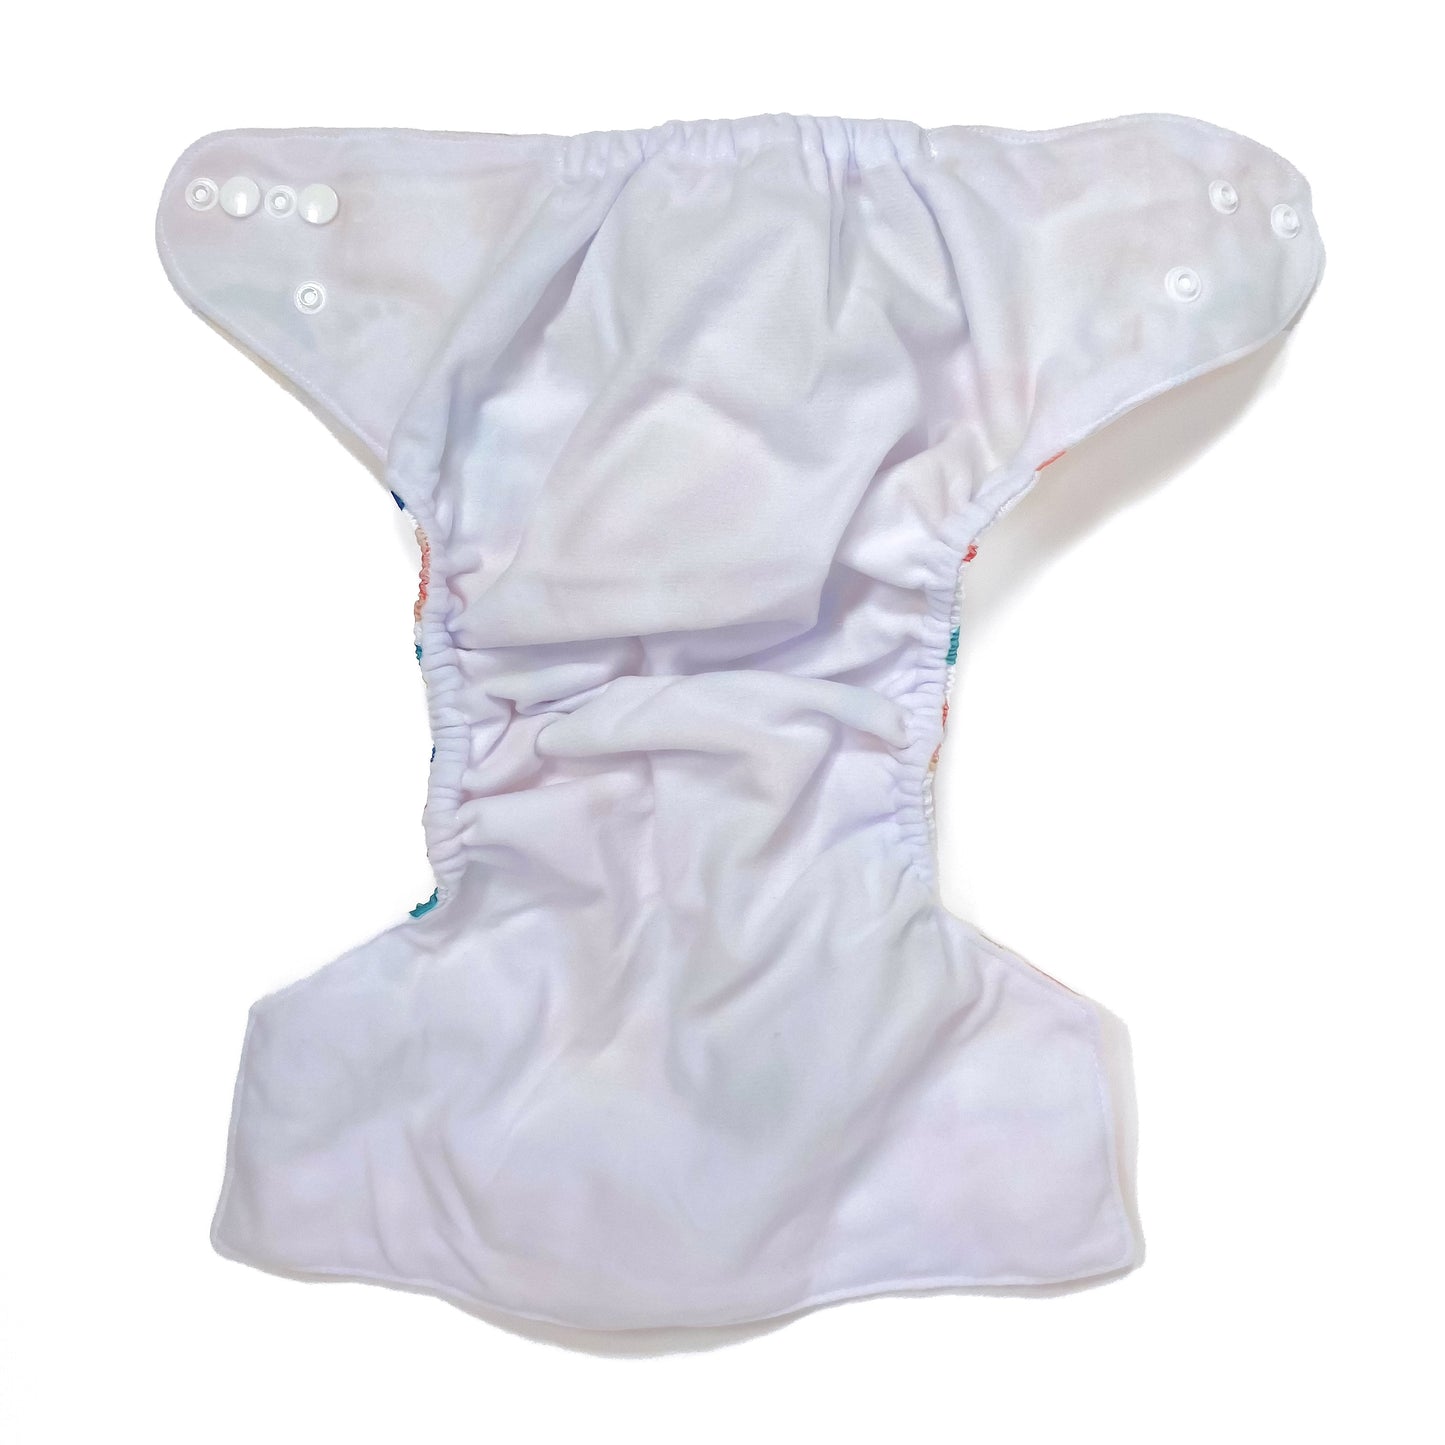 An adjustable reusable nappy for babies and toddlers, featuring a bright rainbow design, with brightly coloured rainbows on a white background. View shows the inside fabric of the nappy.